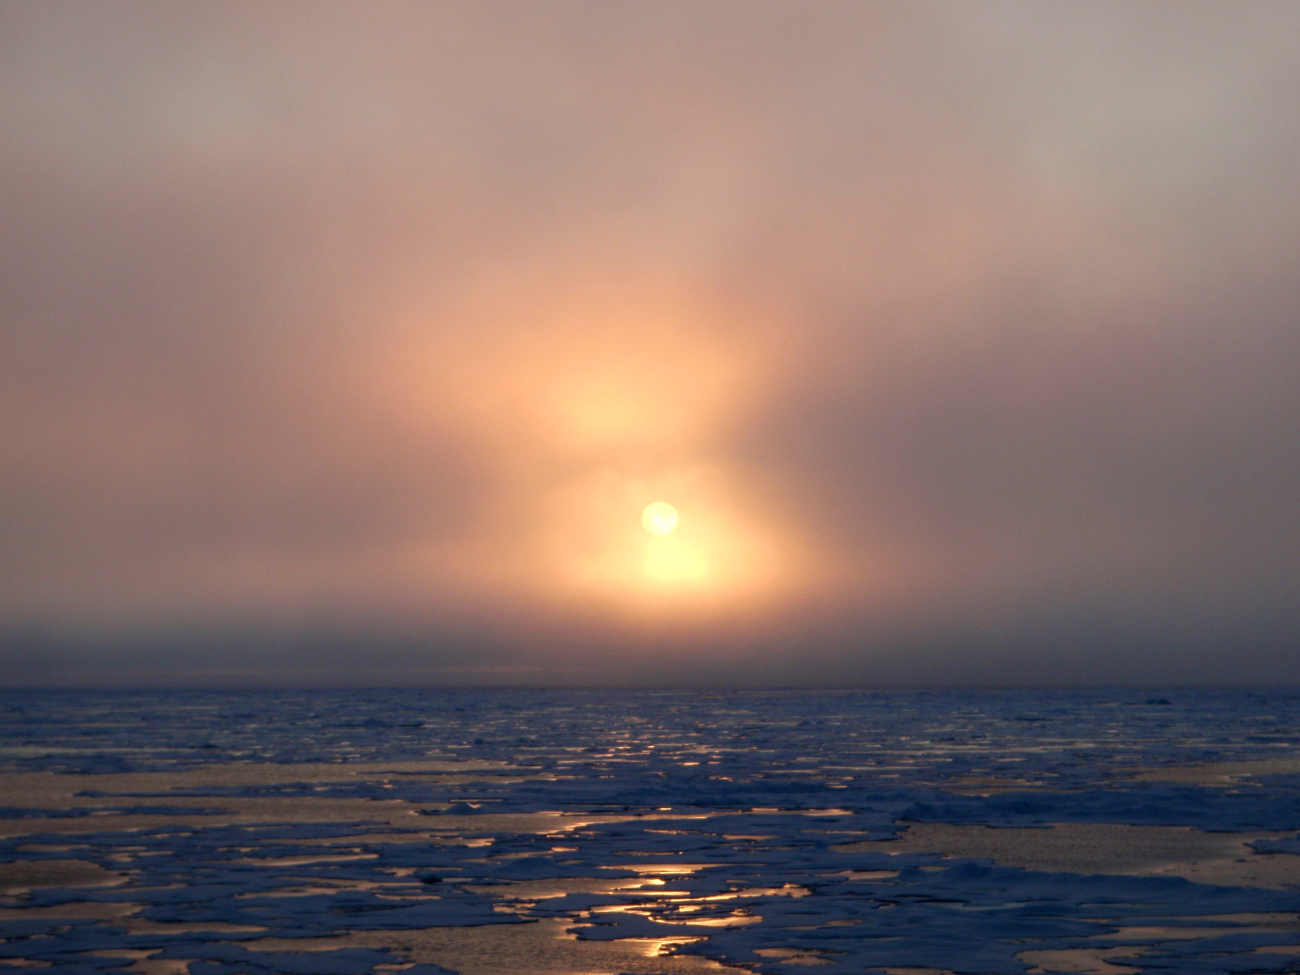 Sun seen through the clouds over late summer ice floes